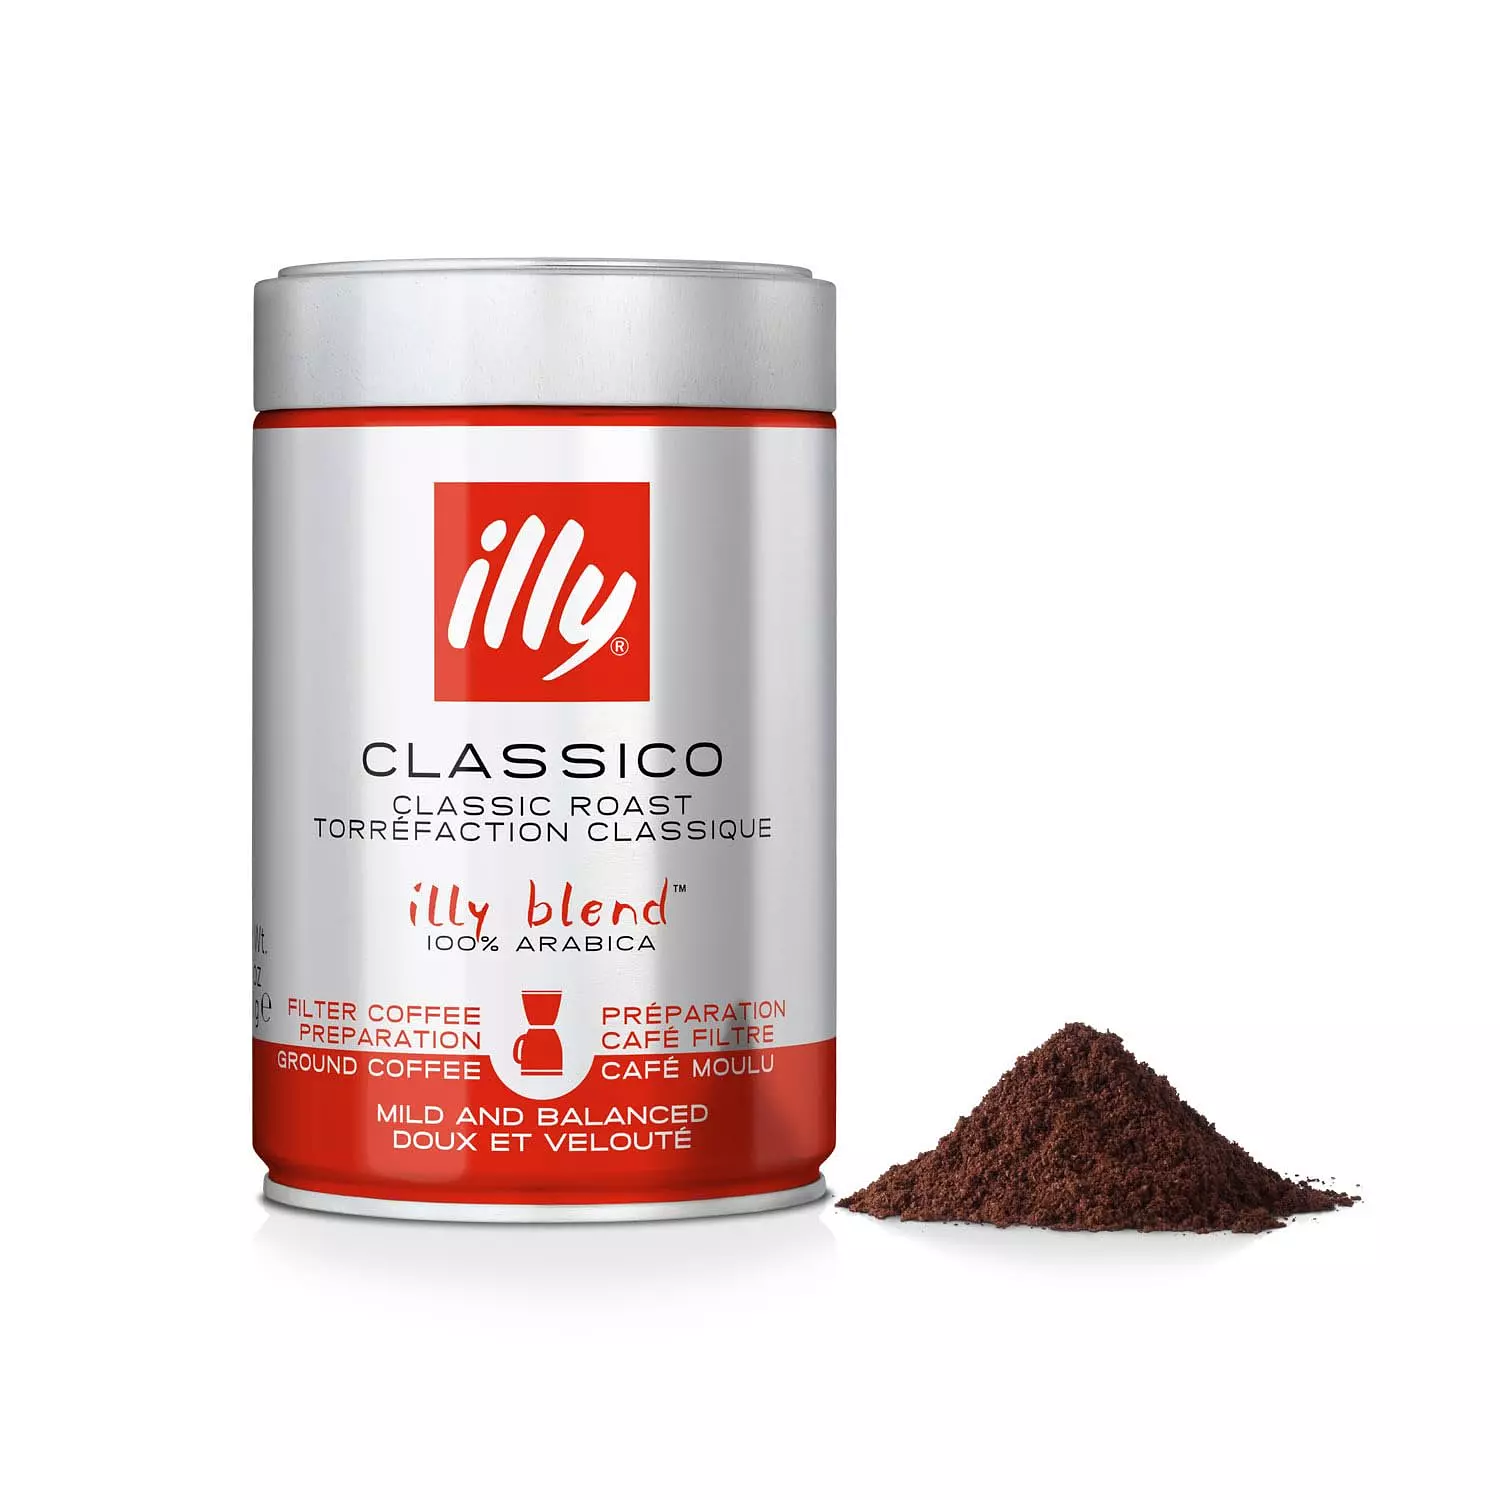 Illy Classico Classic Roast Instant Coffee Classic 250g hover image